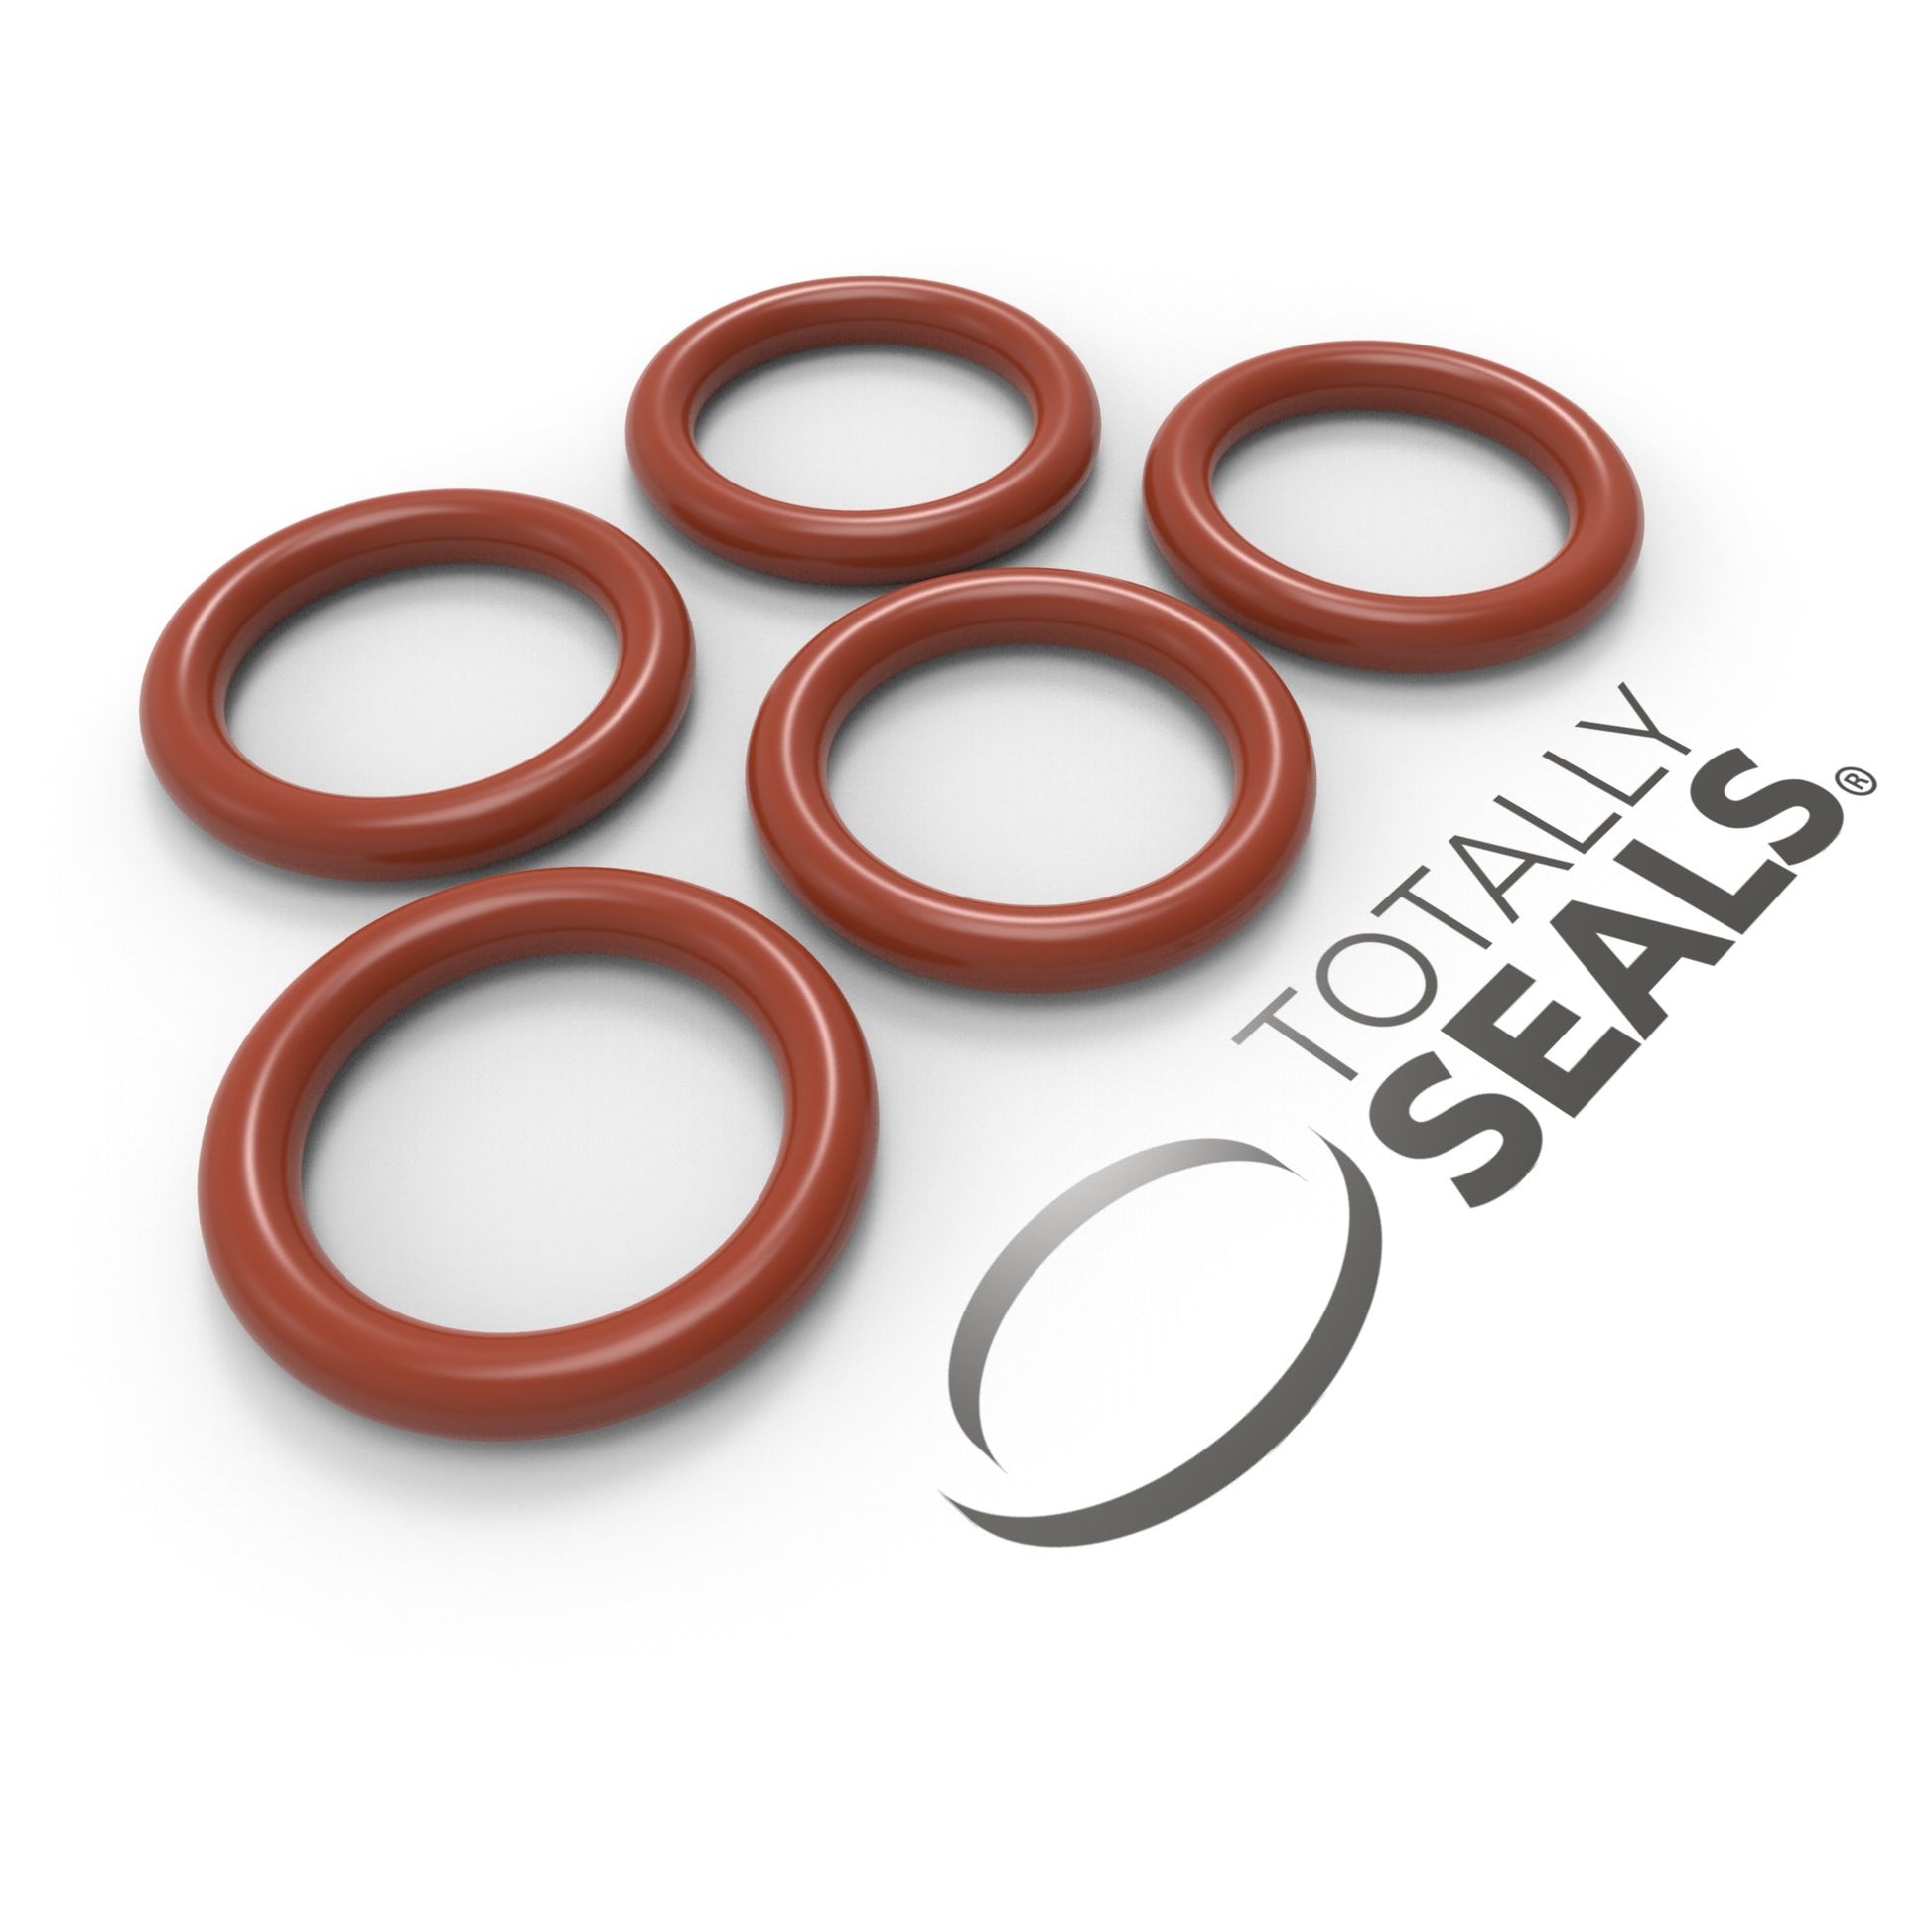 20mm x 2.5mm (25mm OD) Silicone O-Rings